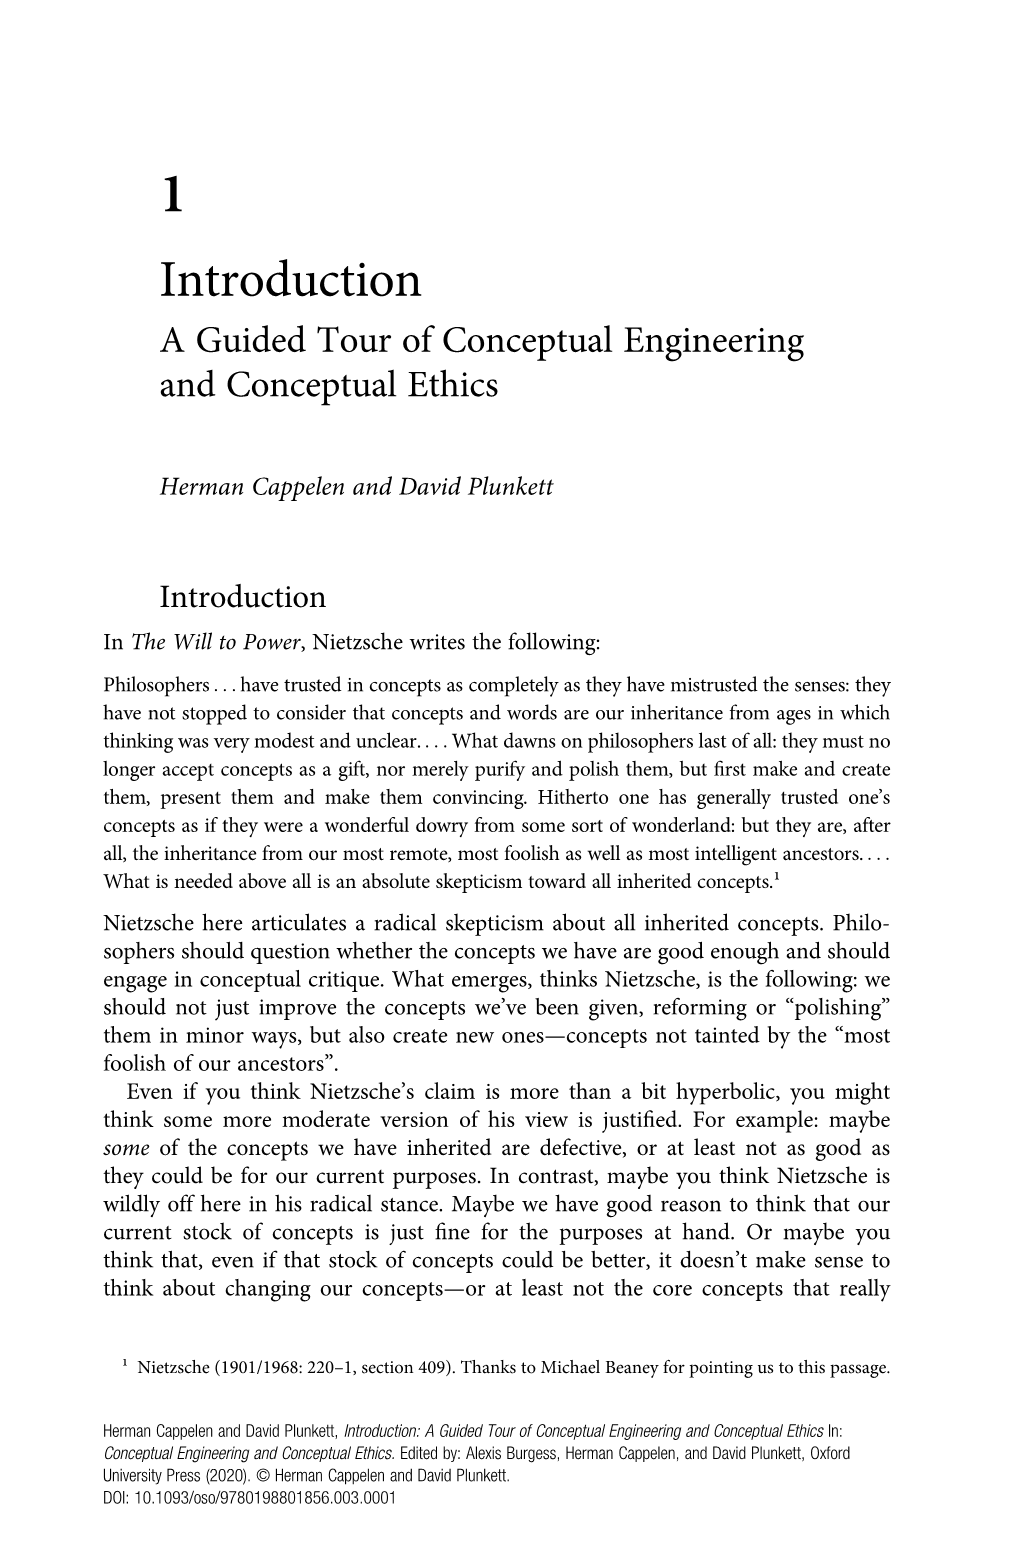 Introduction a Guided Tour of Conceptual Engineering and Conceptual Ethics